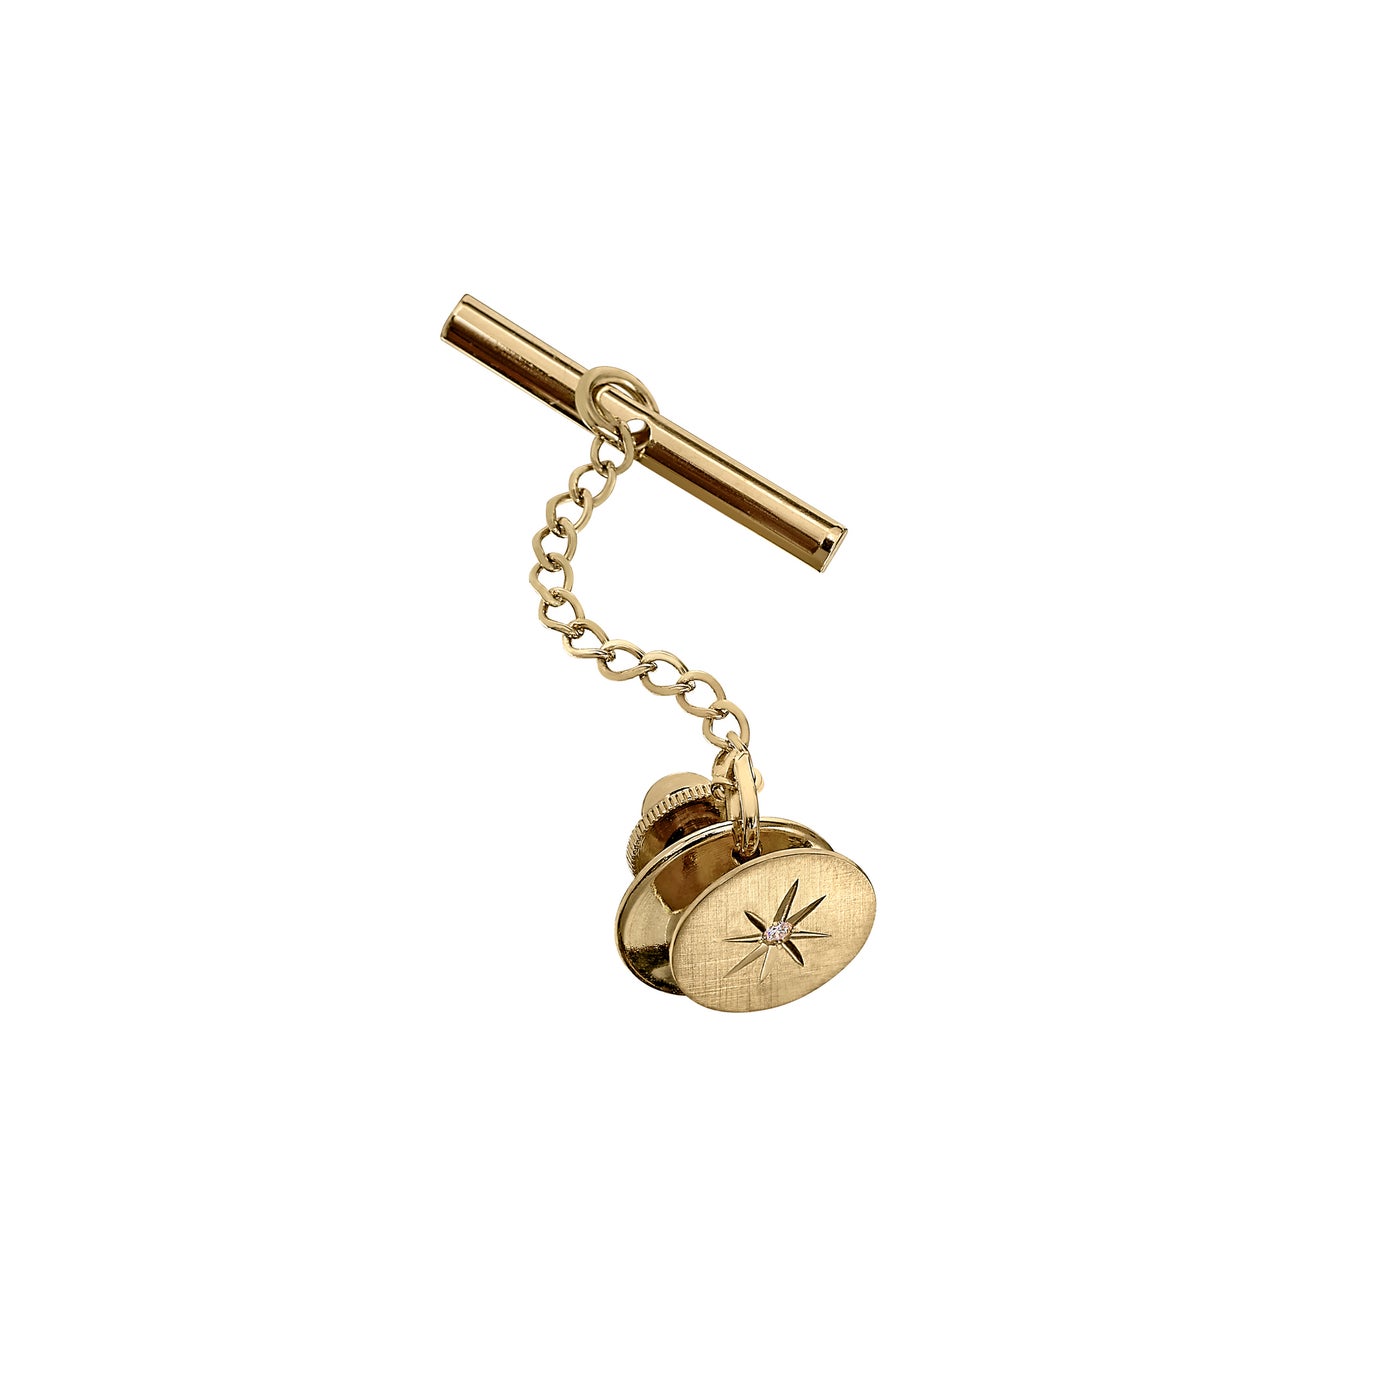 Golden tie pin with chain